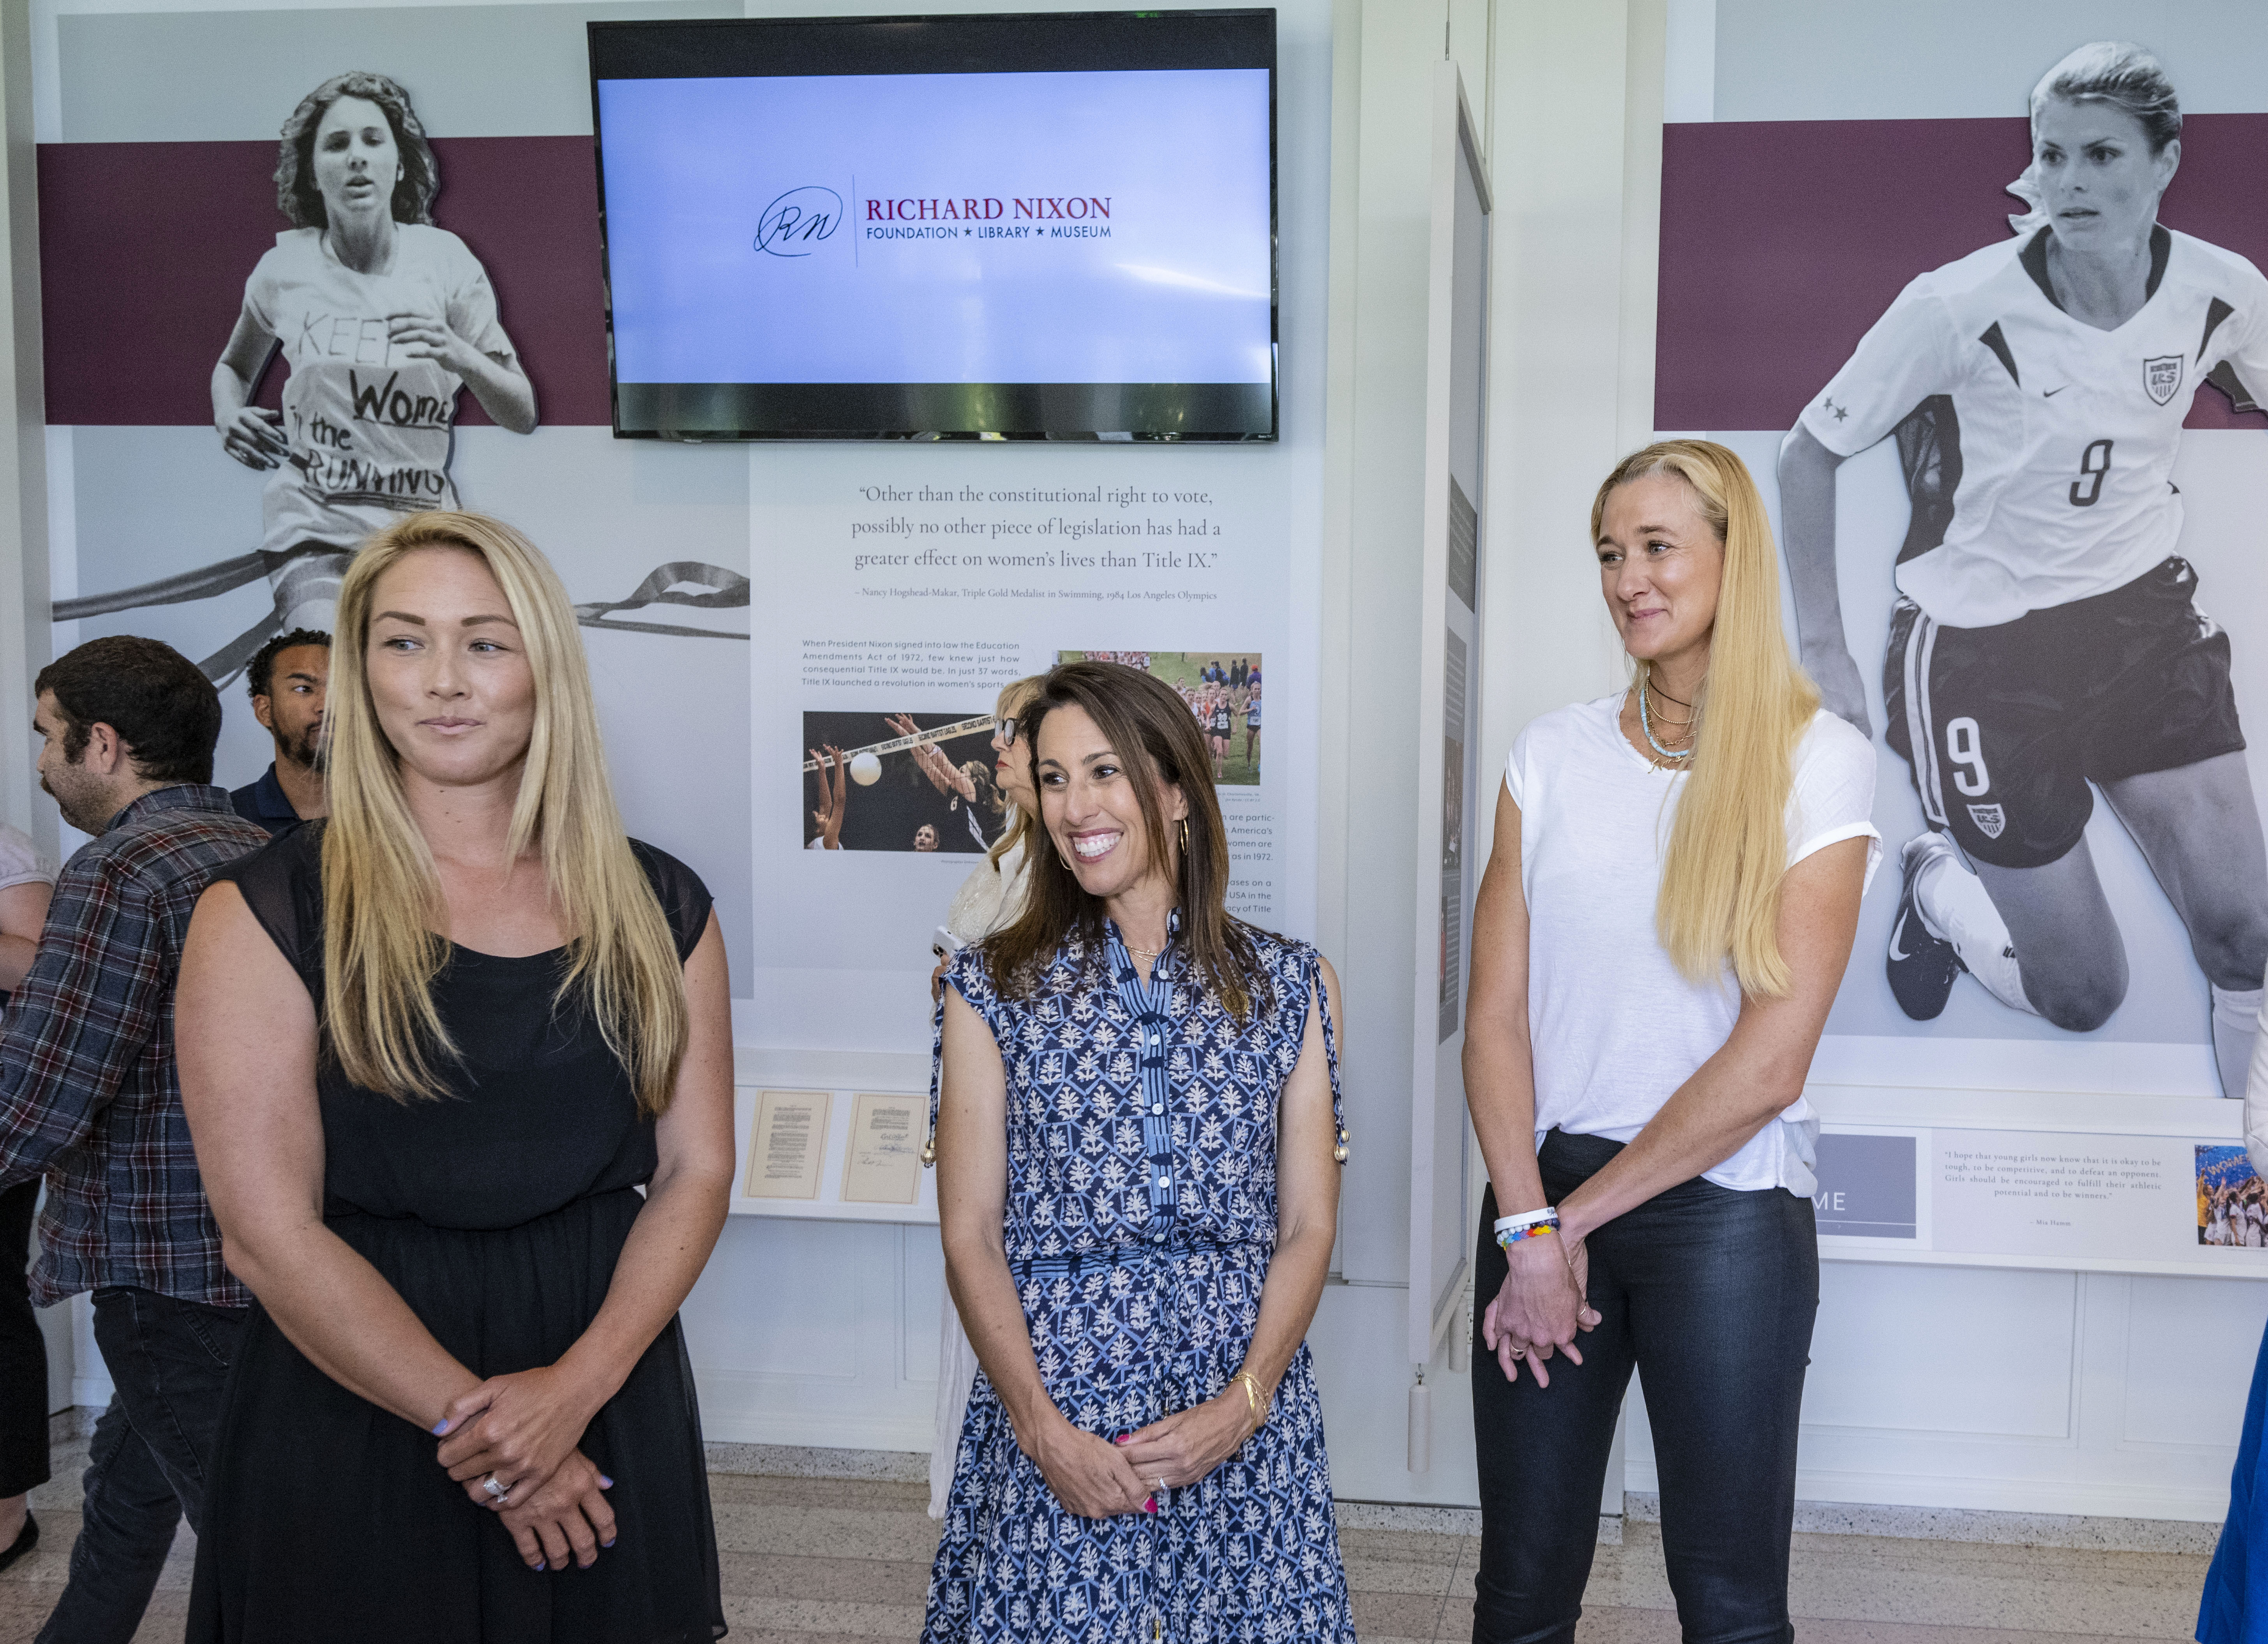 The Richard Nixon Presidential Library and Museum opens a new exhibit entitled, “u201cEvening the Odds: Women Leading the Way”u201d on the 50th anniversary of Nixon signing Title IX into law.